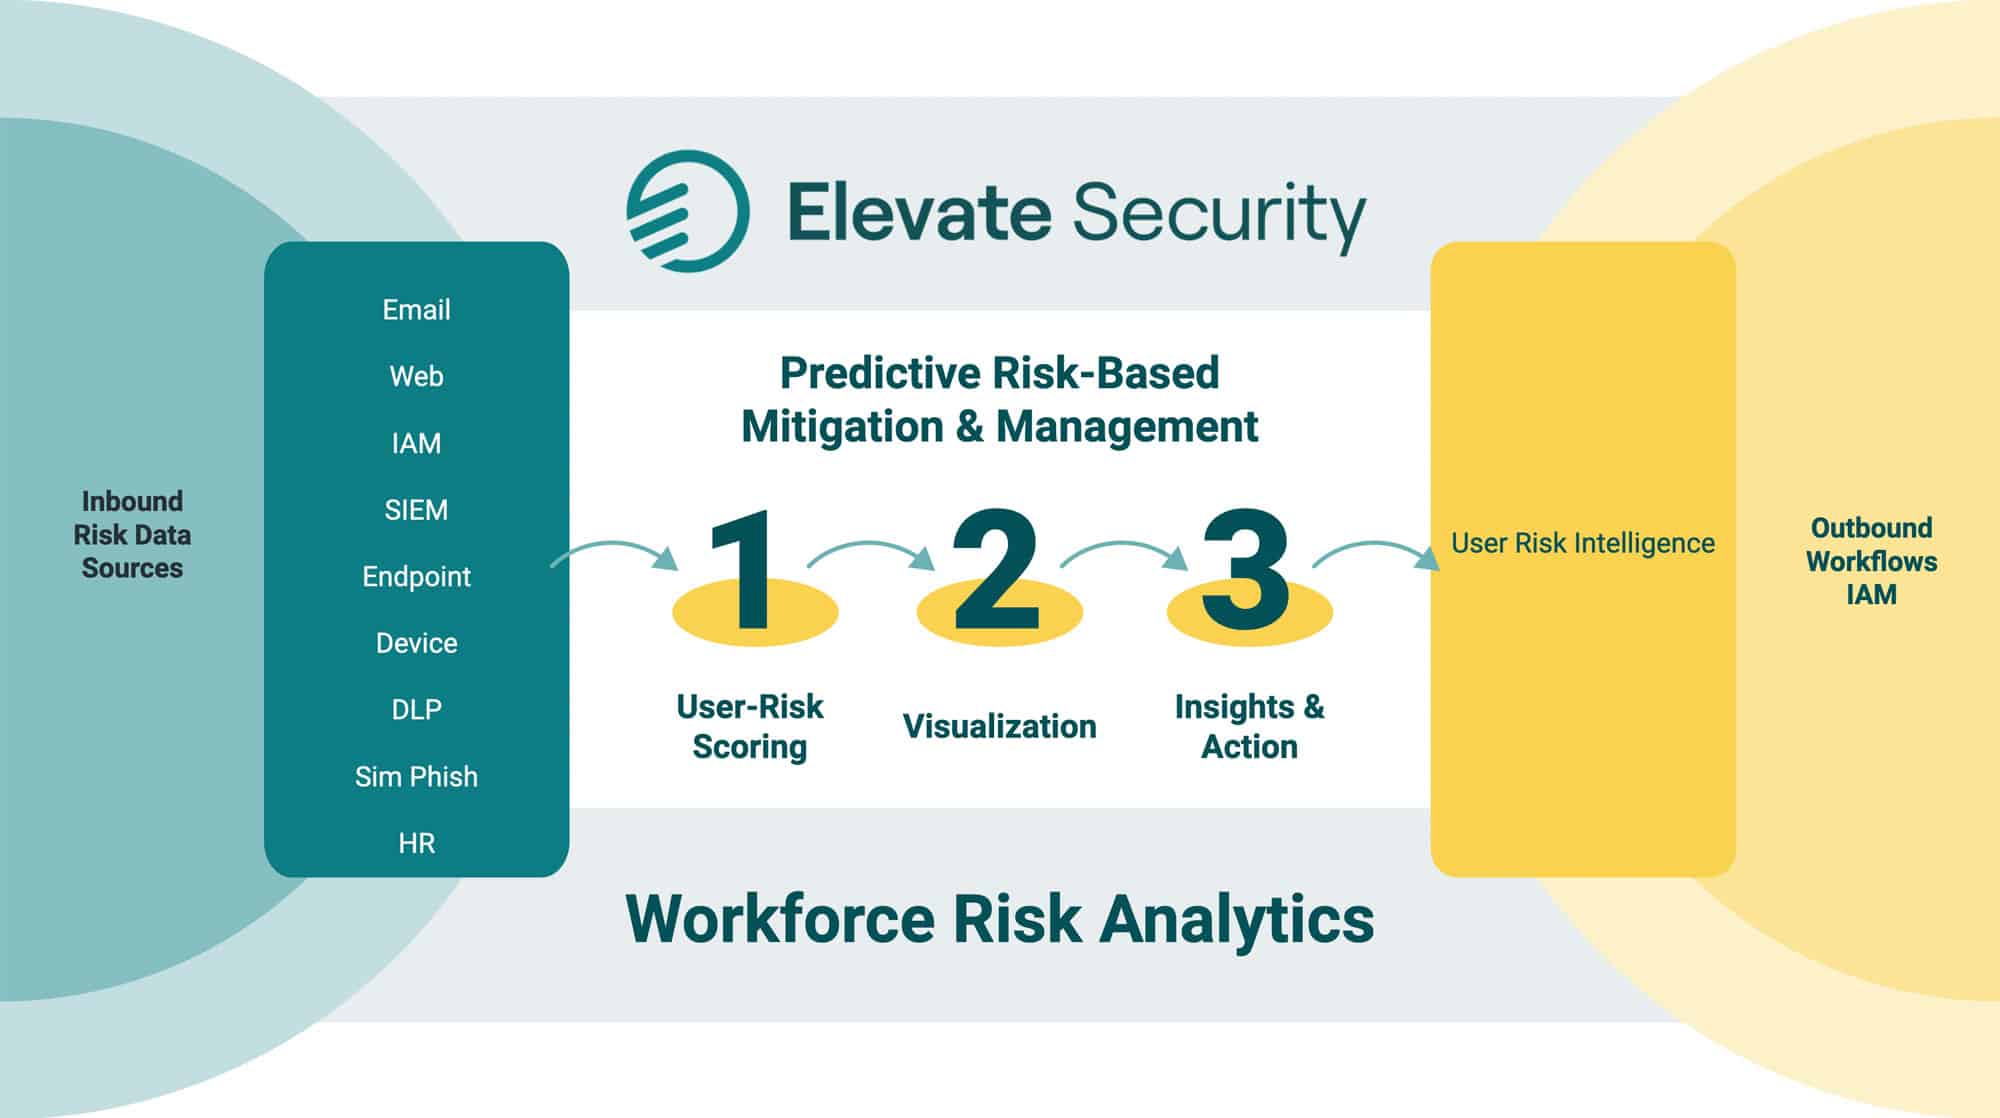 Graphic showing Elevate Security's Predictive Risk-Based Mitigation and Management Process